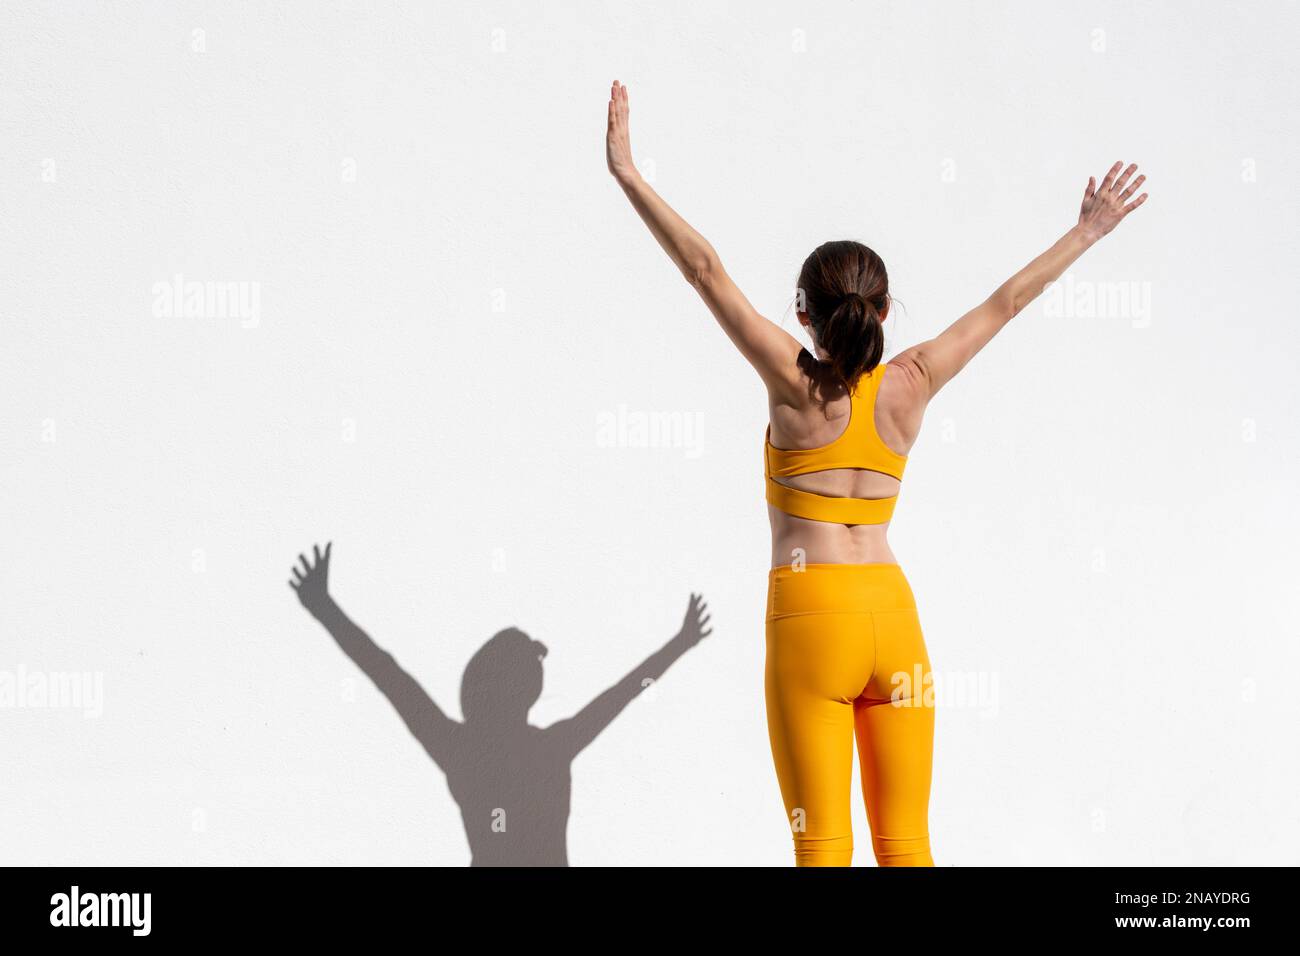 Rear view of a fit, sporty woman with her arms raised standing by a white wall, fitness concept. Stock Photo